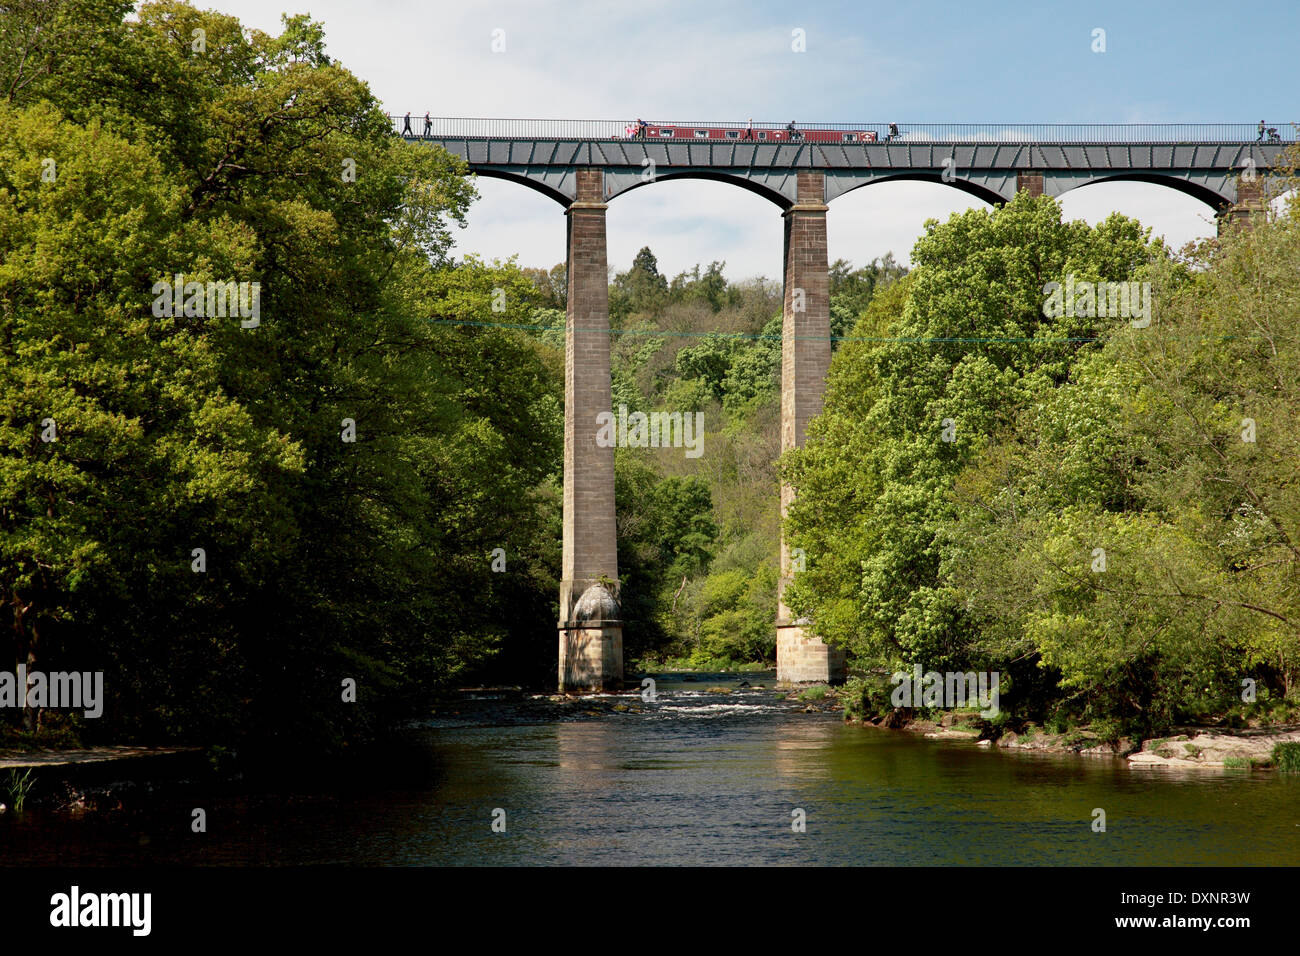 A narrowboat on Pontcysyllte Aqueduct where the Llangollen Canal goes over the river Dee in north Wales Stock Photo